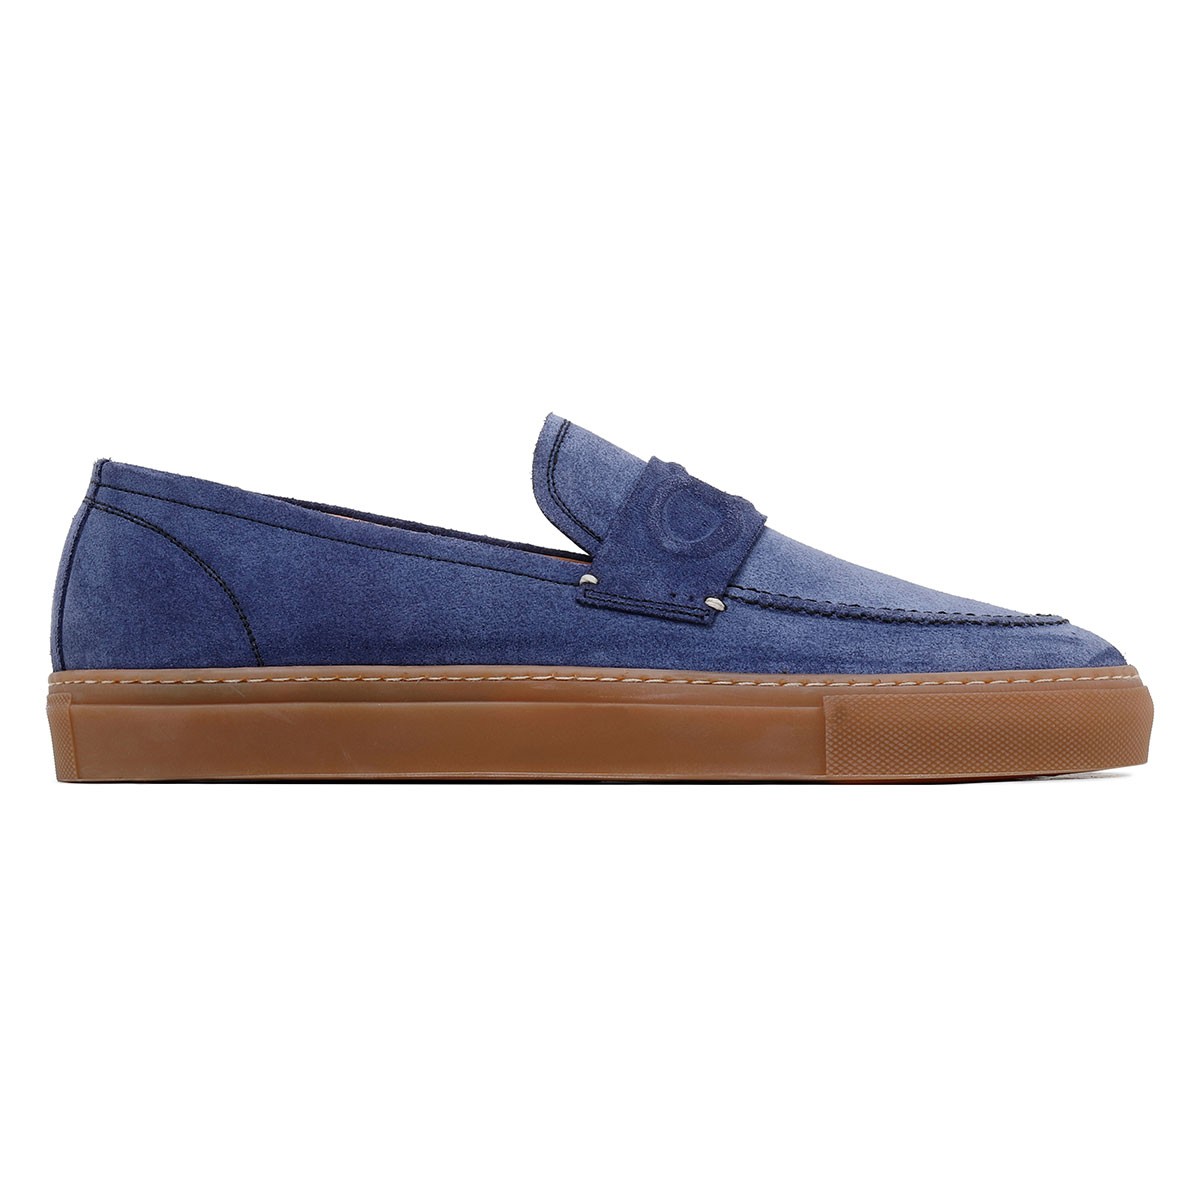 St. Tropez blue suede loafers